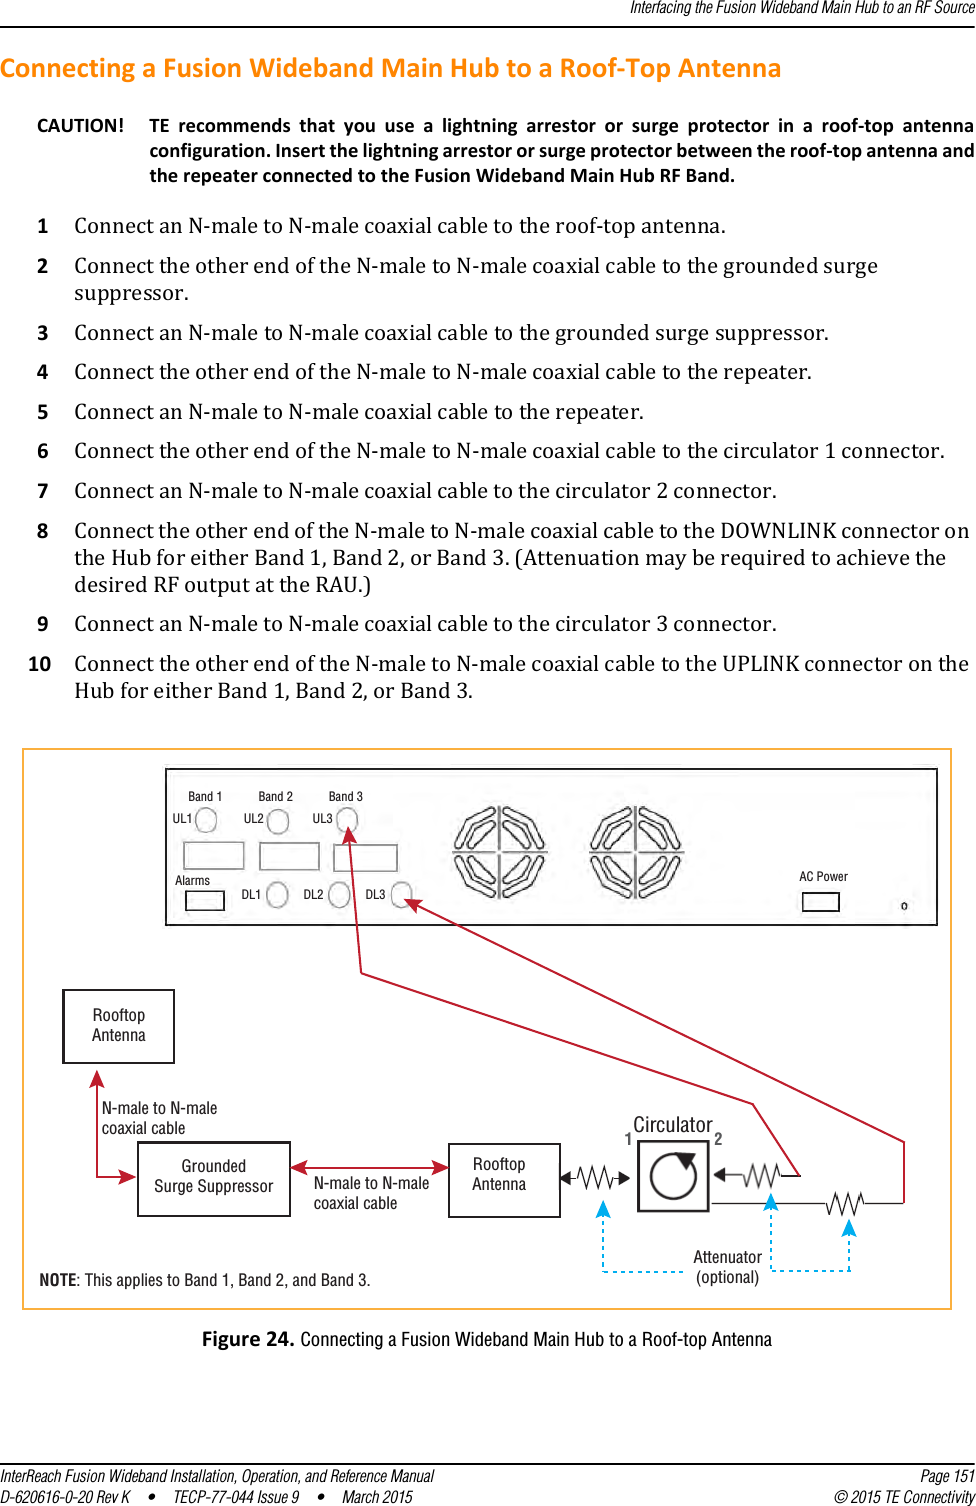 Interfacing the Fusion Wideband Main Hub to an RF SourceInterReach Fusion Wideband Installation, Operation, and Reference Manual Page 151D-620616-0-20 Rev K  •  TECP-77-044 Issue 9  •  March 2015 © 2015 TE ConnectivityConnecting a Fusion Wideband Main Hub to a Roof-Top AntennaCAUTION! TE recommends that you use a lightning arrestor or surge protector in a roof-top antenna configuration. Insert the lightning arrestor or surge protector between the roof-top antenna and the repeater connected to the Fusion Wideband Main Hub RF Band.1Connect an N-male to N-male coaxial cable to the roof-top antenna.2Connect the other end of the N-male to N-male coaxial cable to the grounded surge suppressor.3Connect an N-male to N-male coaxial cable to the grounded surge suppressor.4Connect the other end of the N-male to N-male coaxial cable to the repeater.5Connect an N-male to N-male coaxial cable to the repeater.6Connect the other end of the N-male to N-male coaxial cable to the circulator 1 connector.7Connect an N-male to N-male coaxial cable to the circulator 2 connector.8Connect the other end of the N-male to N-male coaxial cable to the DOWNLINK connector on the Hub for either Band 1, Band 2, or Band 3. (Attenuation may be required to achieve the desired RF output at the RAU.)9Connect an N-male to N-male coaxial cable to the circulator 3 connector.10 Connect the other end of the N-male to N-male coaxial cable to the UPLINK connector on the Hub for either Band 1, Band 2, or Band 3.Figure 24. Connecting a Fusion Wideband Main Hub to a Roof-top AntennaBand 1 Band 2 Band 3UL1 UL2 UL3AlarmsDL1 DL2 DL3AC PowerAttenuator(optional)NOTE: This applies to Band 1, Band 2, and Band 3.N-male to N-malecoaxial cableRooftopAntennaN-male to N-malecoaxial cableGroundedSurge SuppressorRooftopAntennaCirculator12